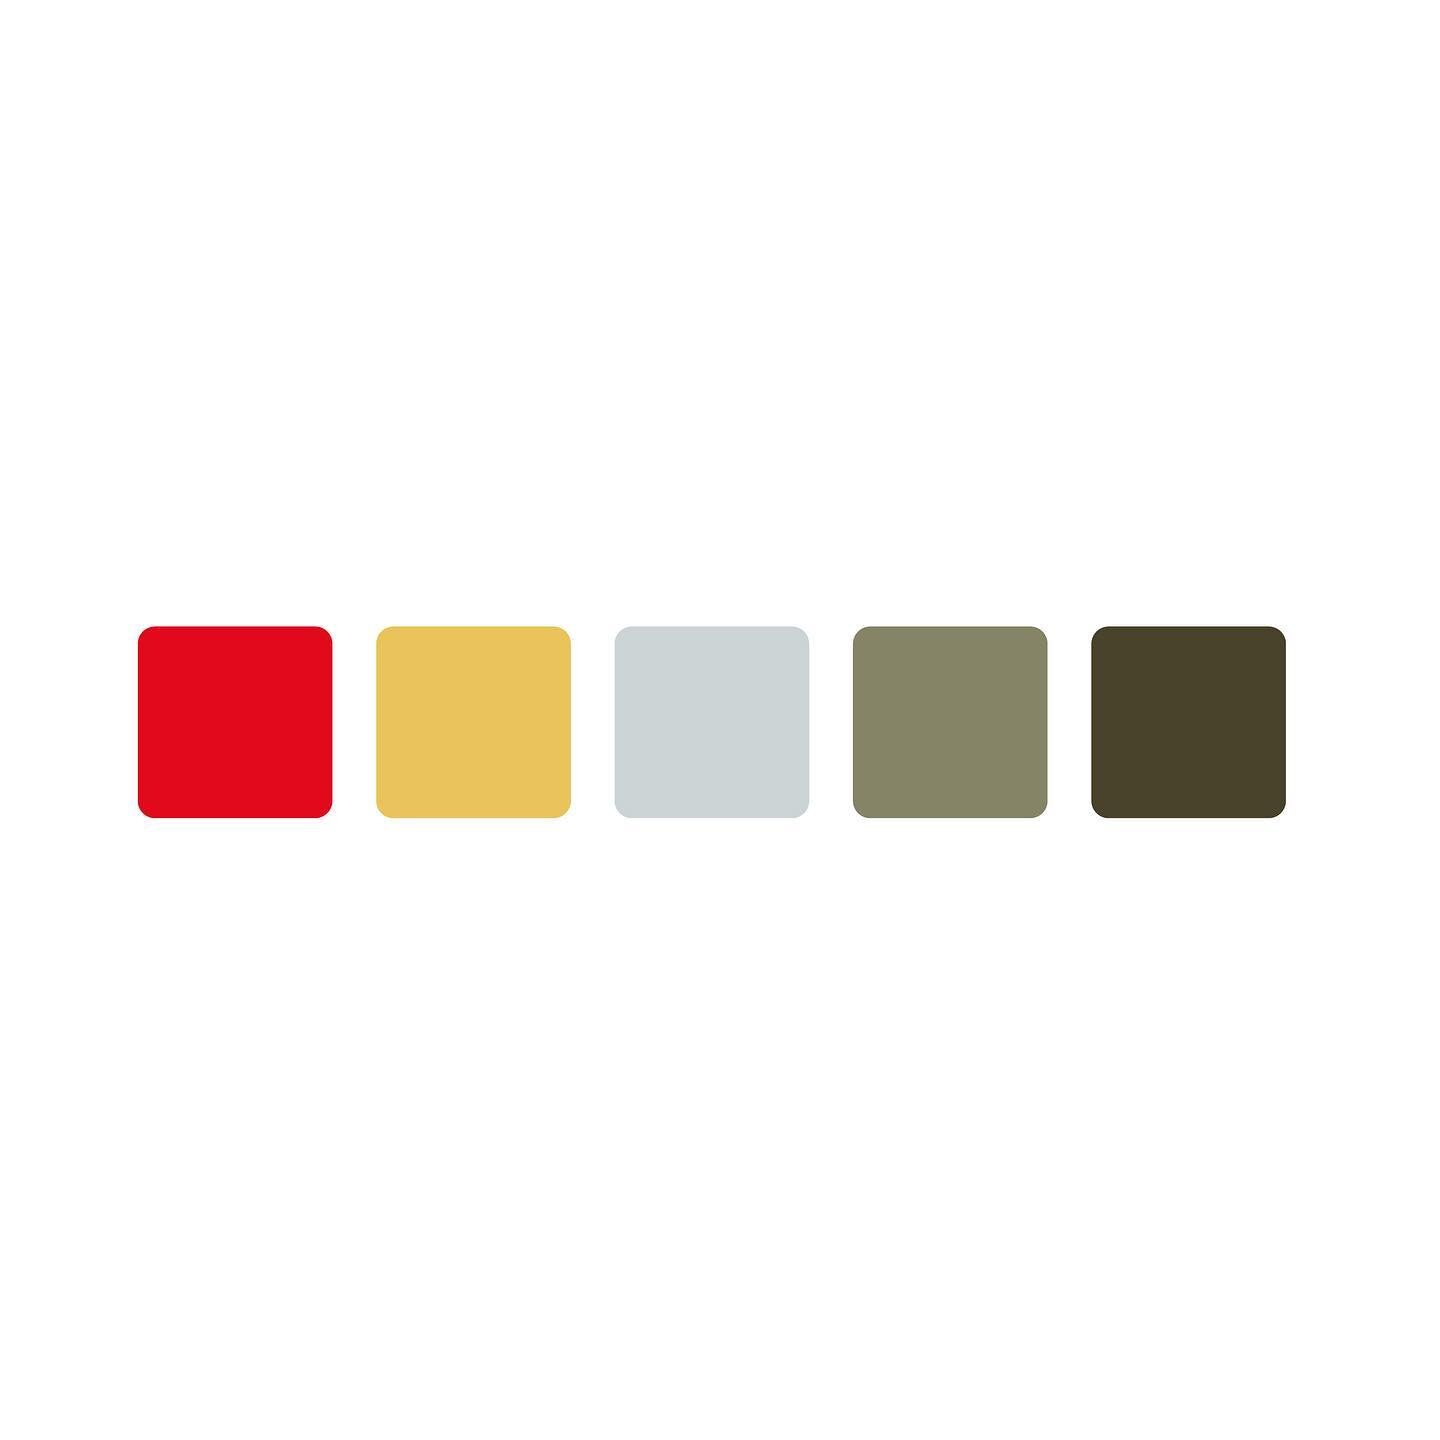 #naturepalette: I created this palette inspired by a photo of wildflowers by @anniespratt . I would use the red as an accent, with the brighter/lighter tones as wall colors I think. Let me know if you'd like color HEX codes and where you use them! ⁠⁠